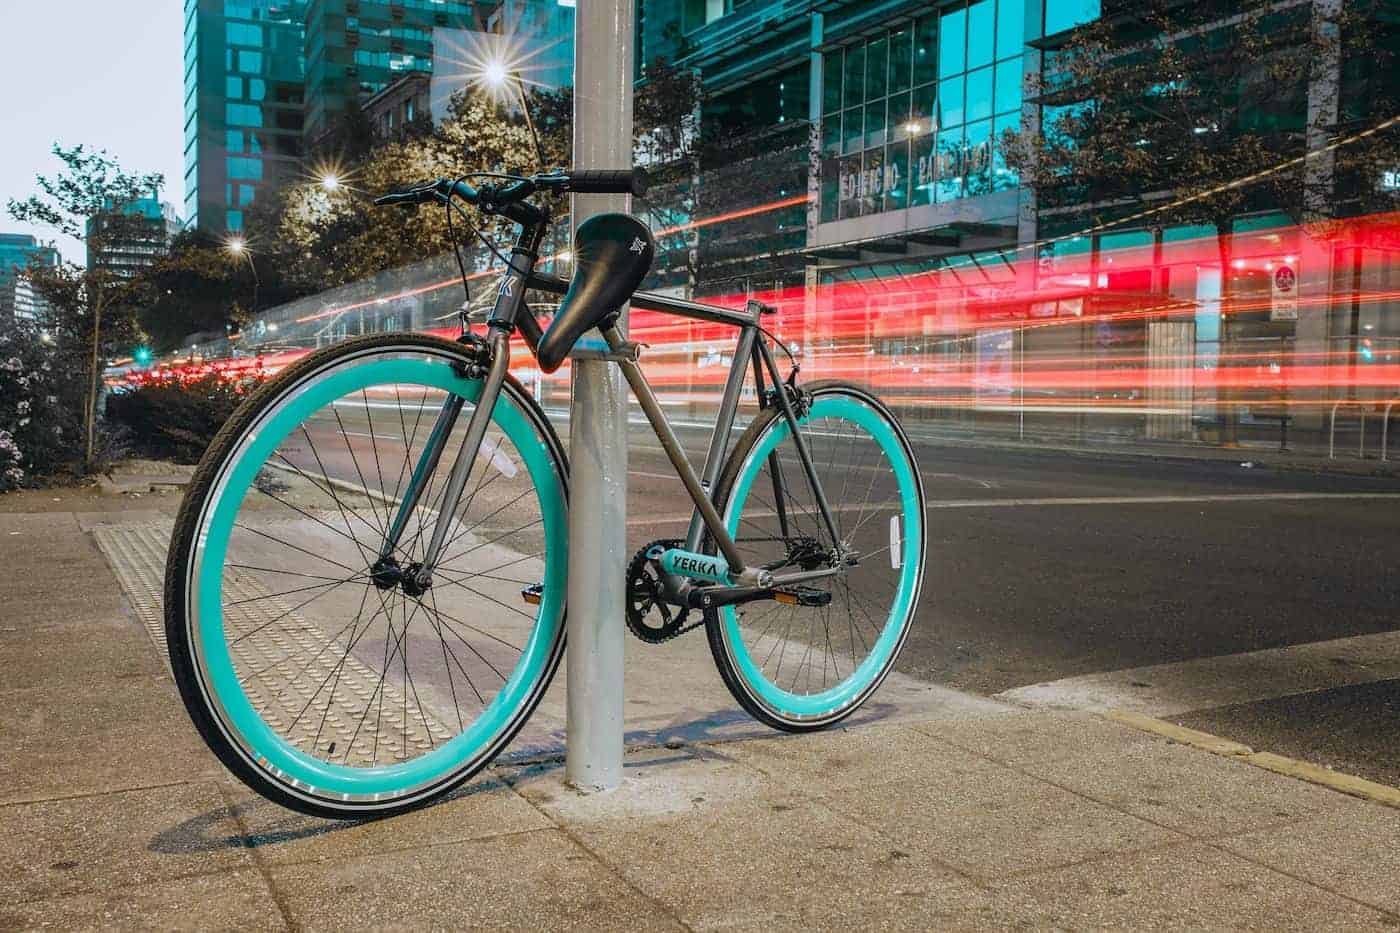 unstealable bicycle startup, yerka, strategizes with waze and volvo